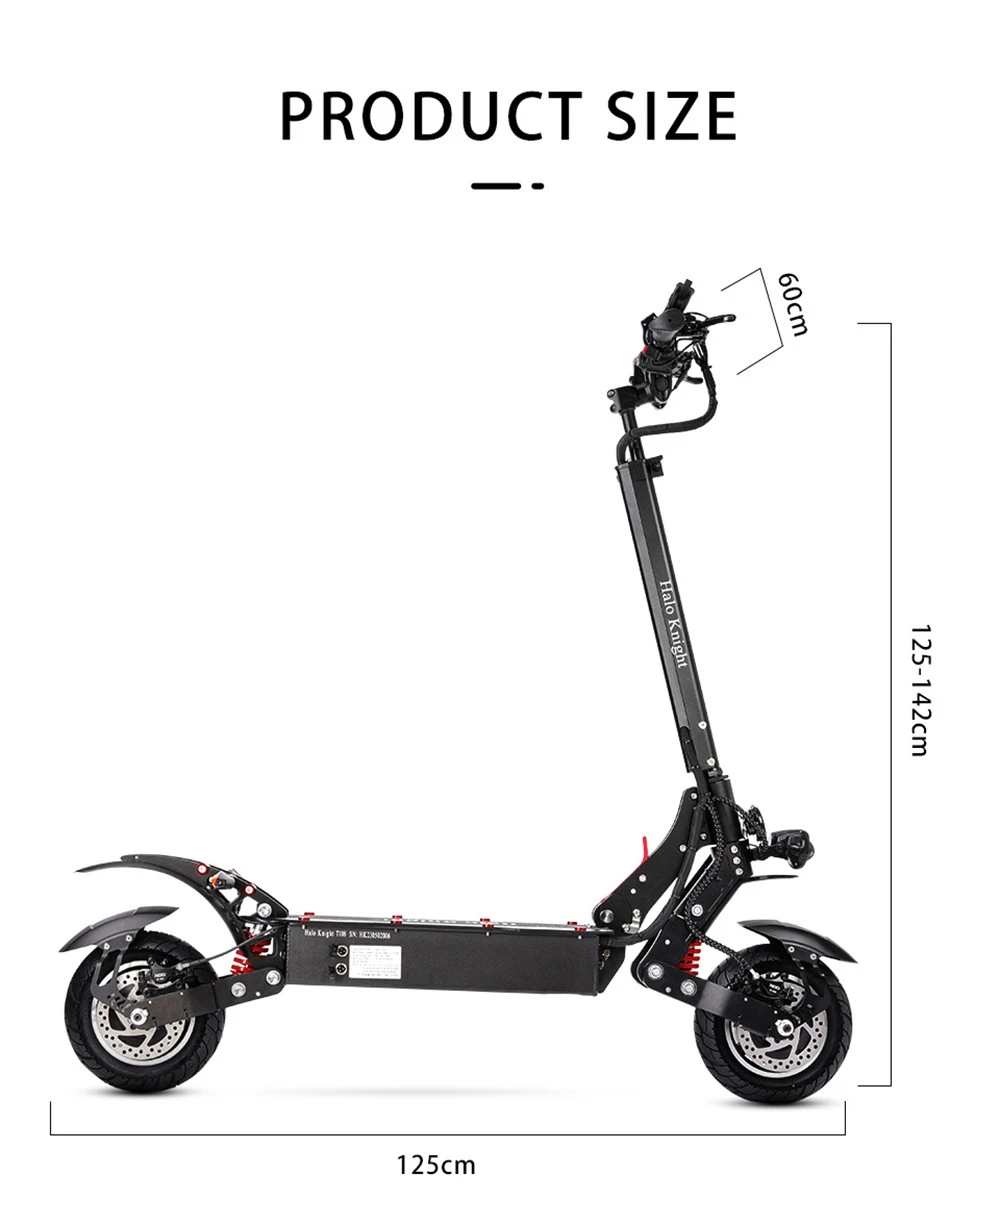 https://img.gkbcdn.com/d/202308/Halo-Knight-T108-Electric-Scooter-10-inch-Road-Tires-521959-16._p1_.jpg